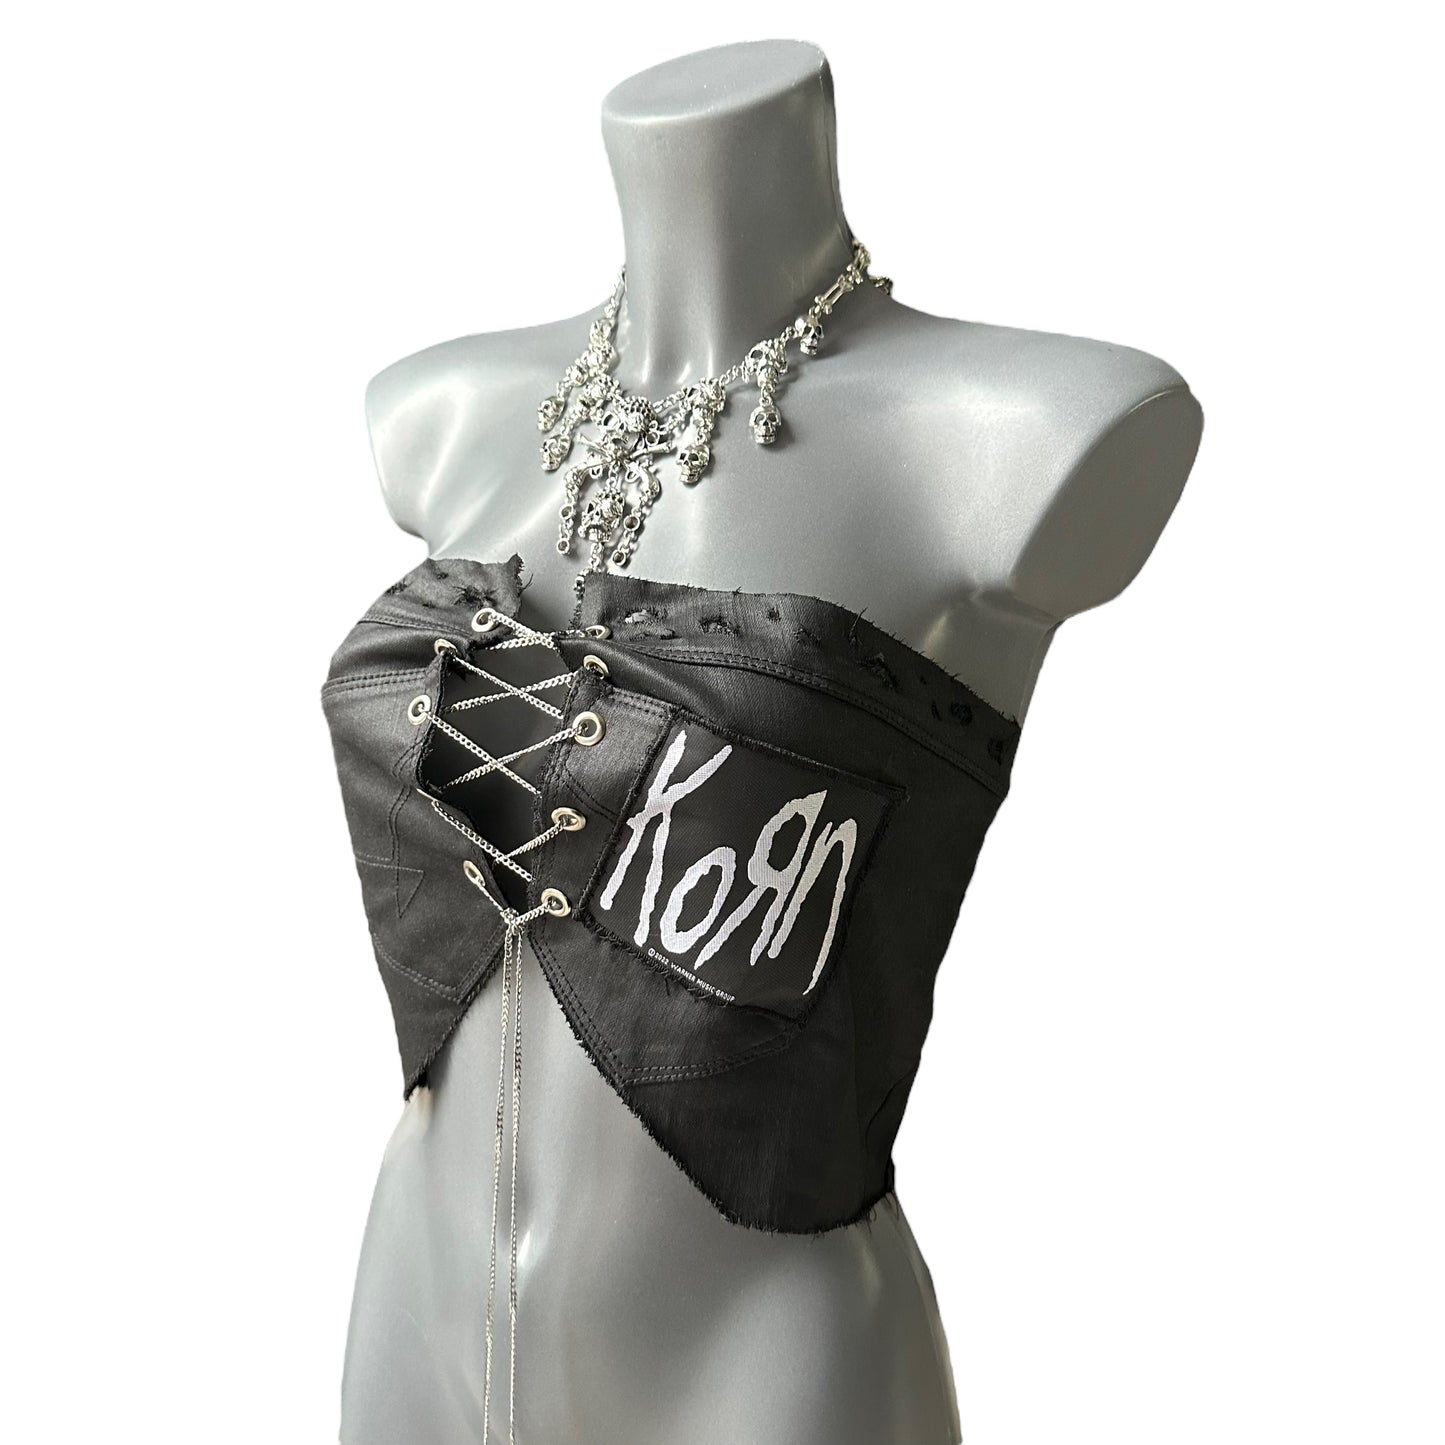 Handmade Korn patch black corset top with chain 6 8 10